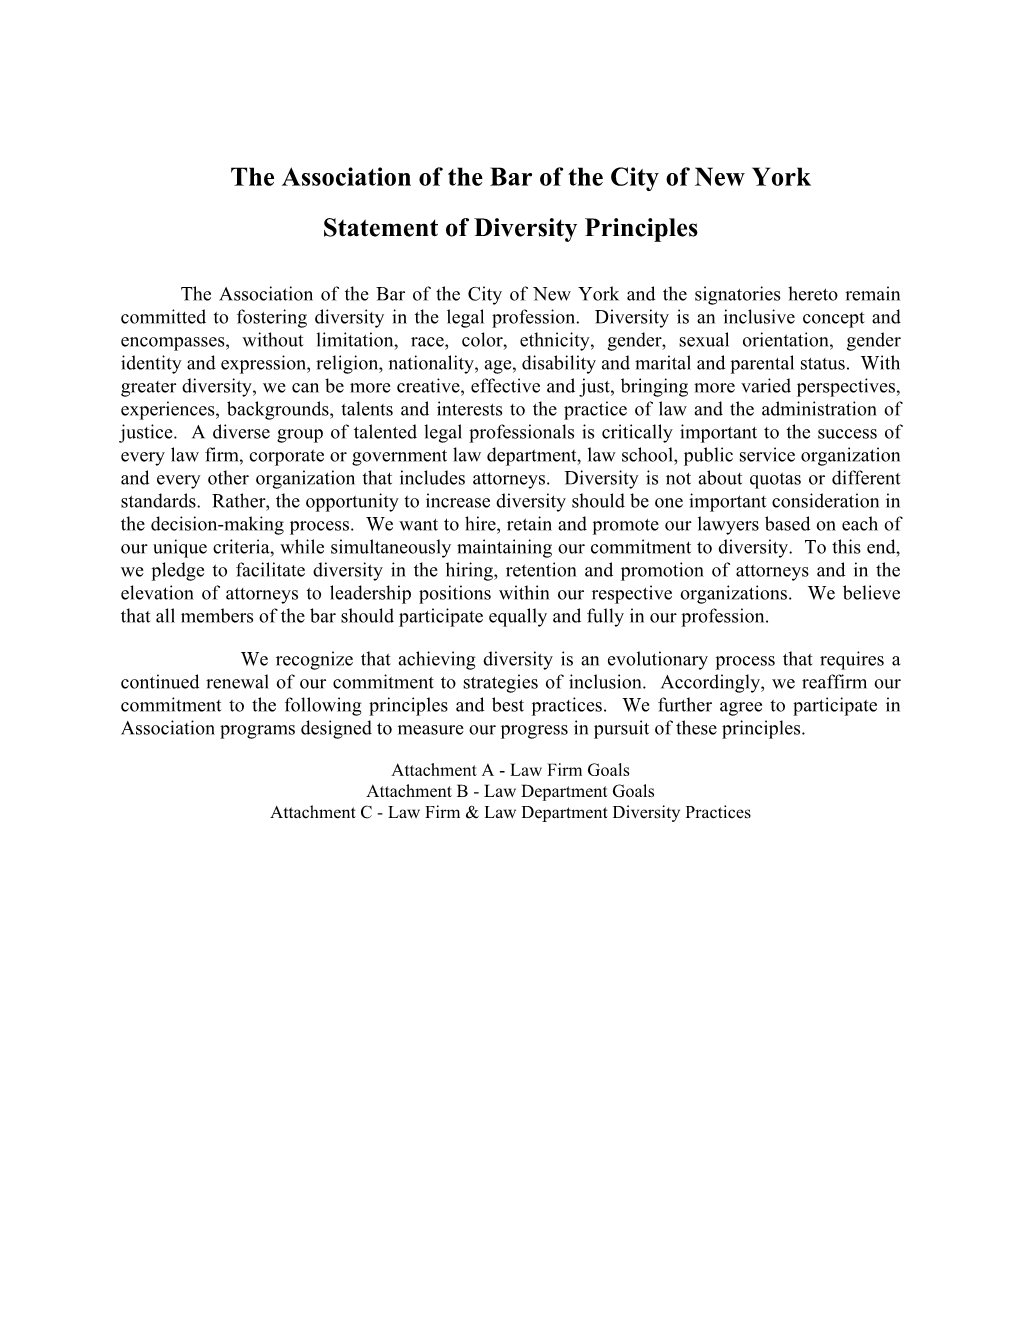 The Association of the Bar of the City of New York Statement of Diversity Principles